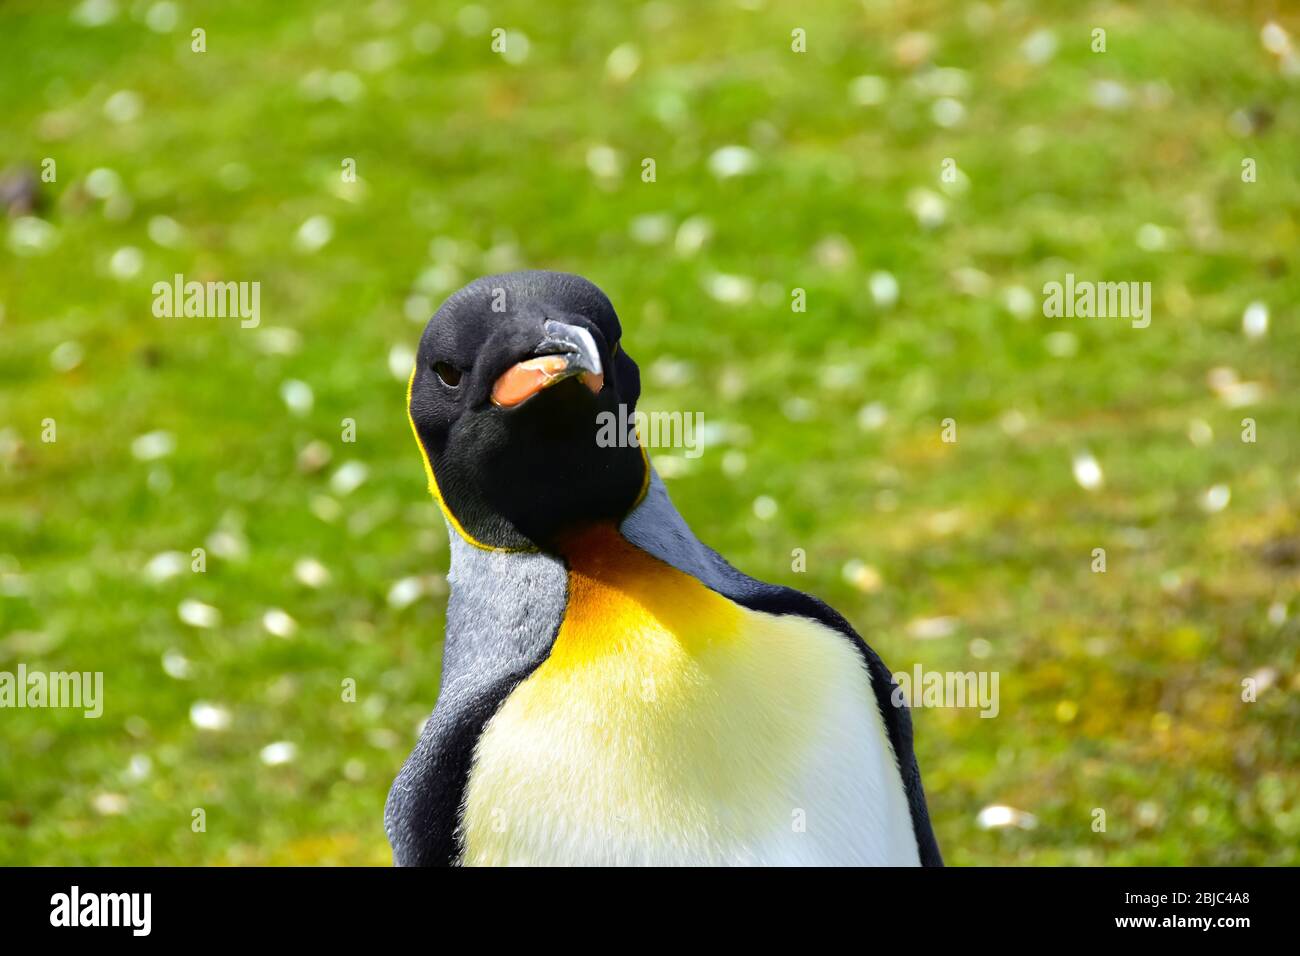 Portrait of a King Penguin at Volunteer Point, Falkland Islands. Stock Photo